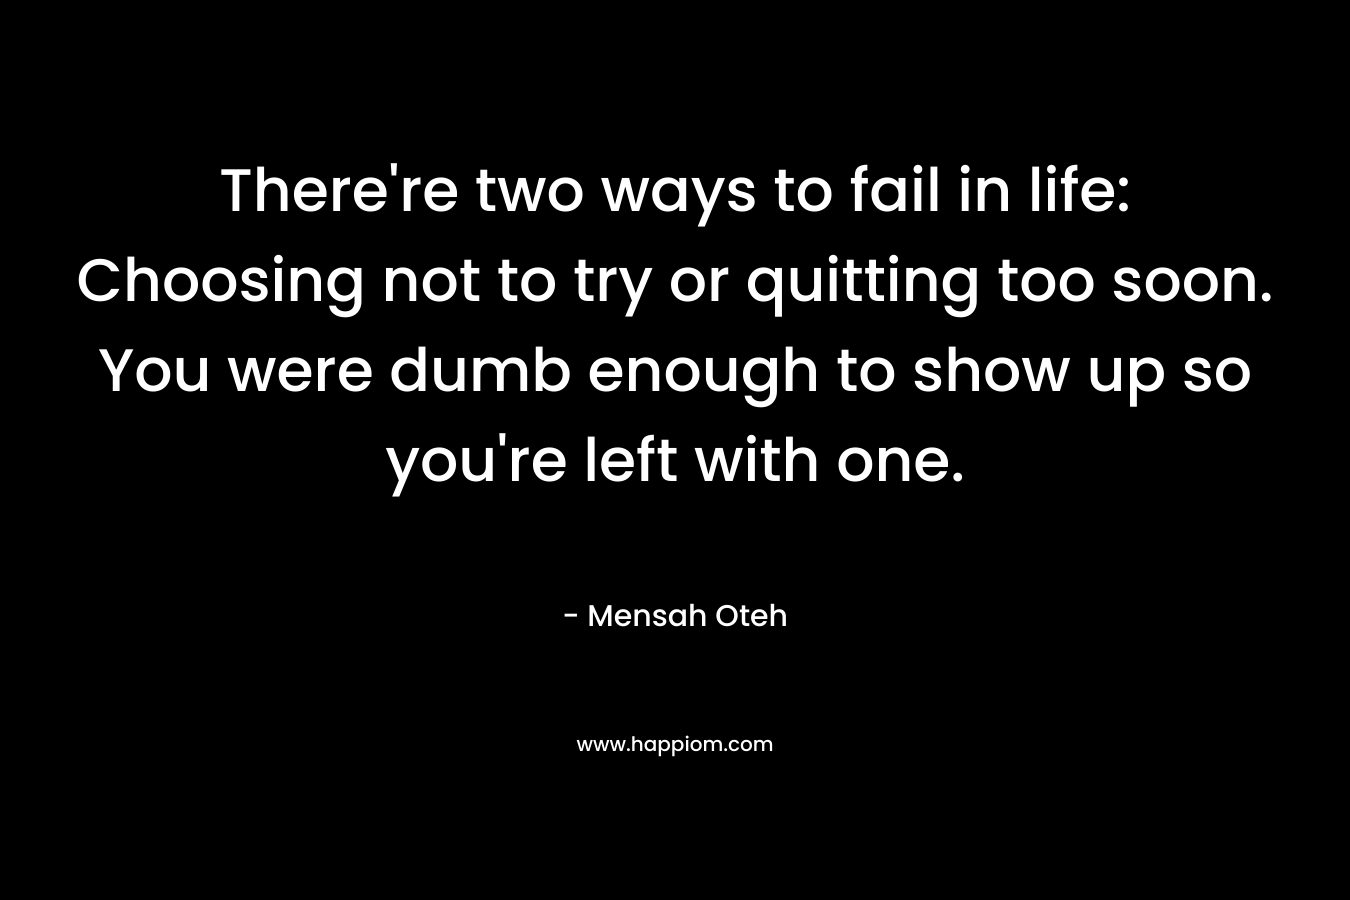 There're two ways to fail in life: Choosing not to try or quitting too soon. You were dumb enough to show up so you're left with one.